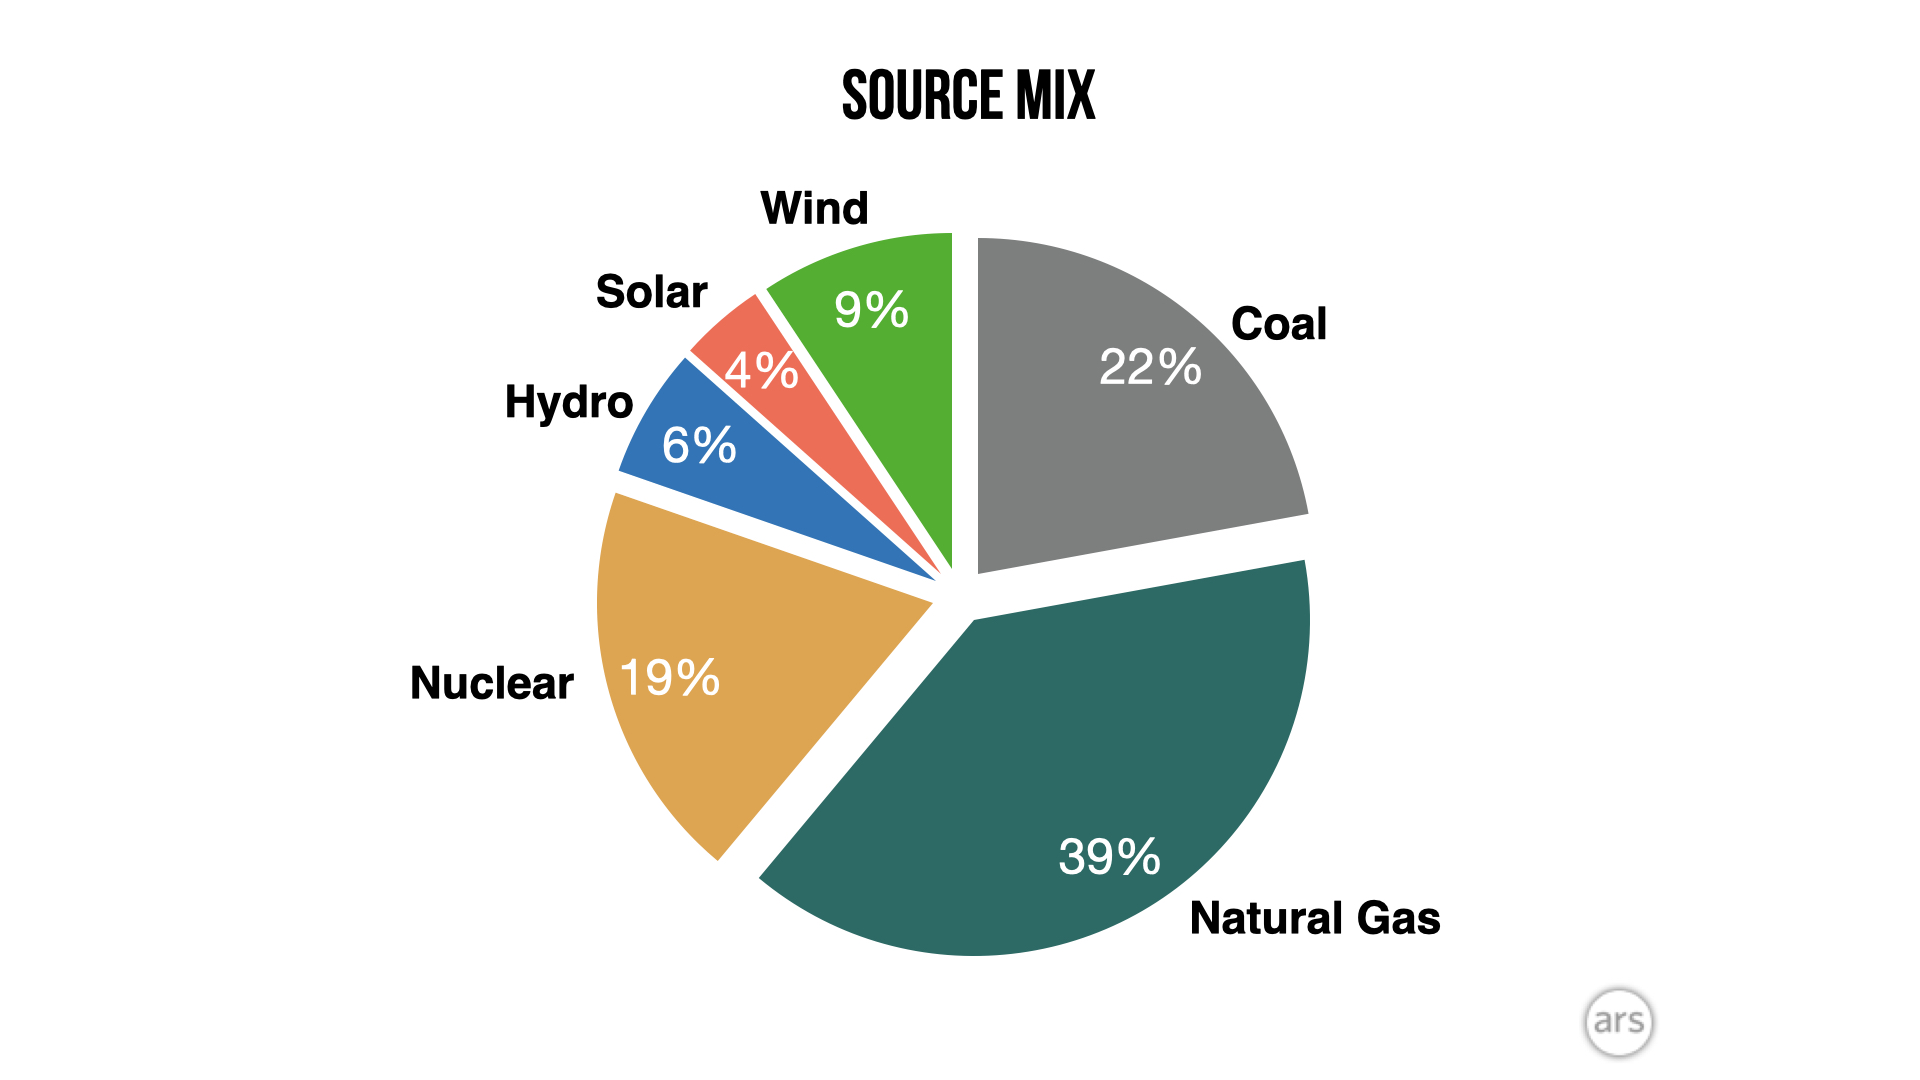 In 2021, all three renewable sources have caught up with nuclear and have continued to approach coal as a percentage of total generation.